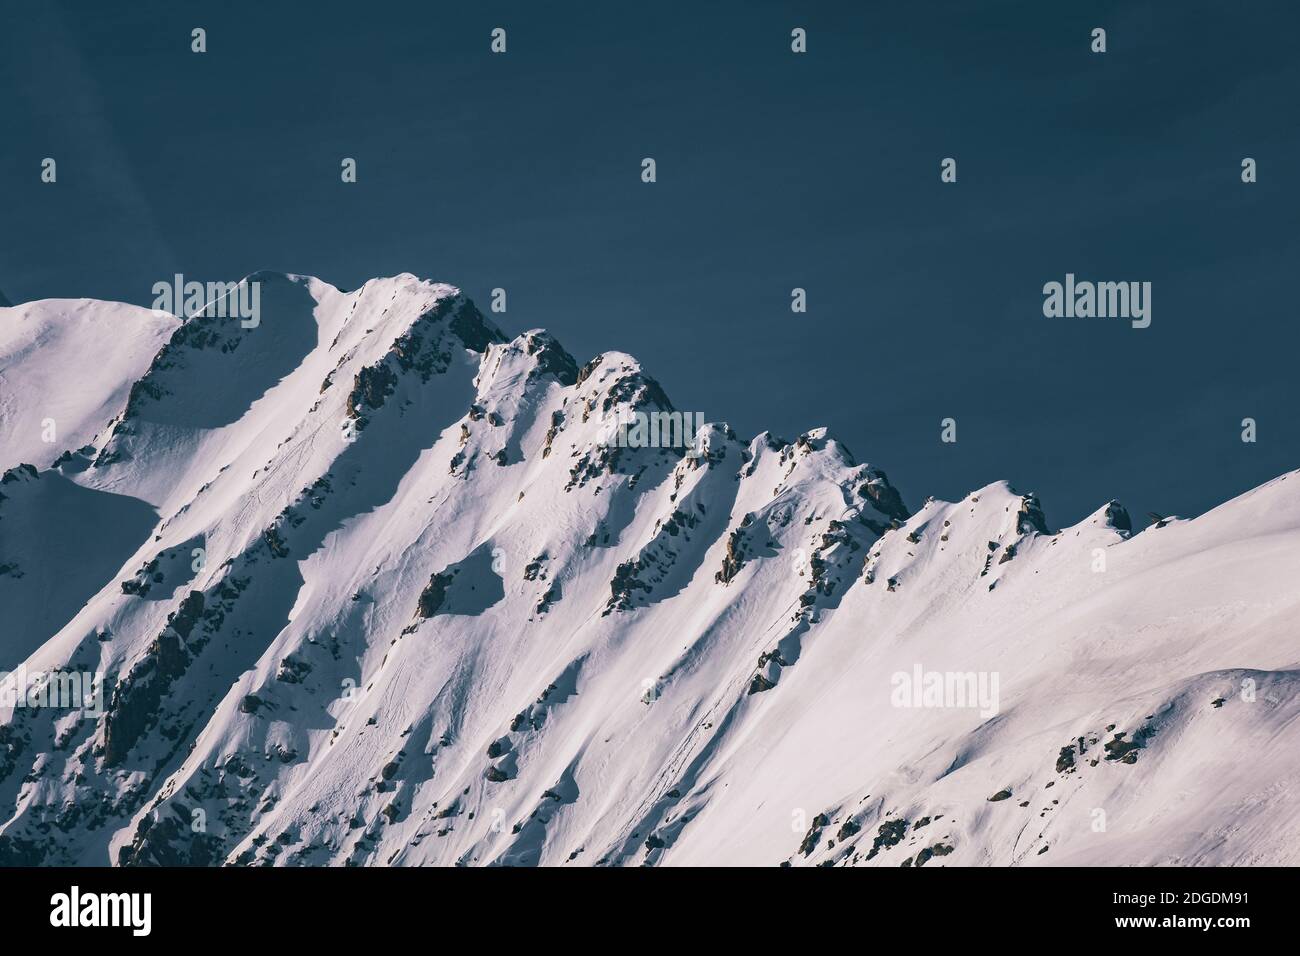 Scenic view of snowcapped mountains against hazy sky, Panticosa, Huesca, Spain Stock Photo